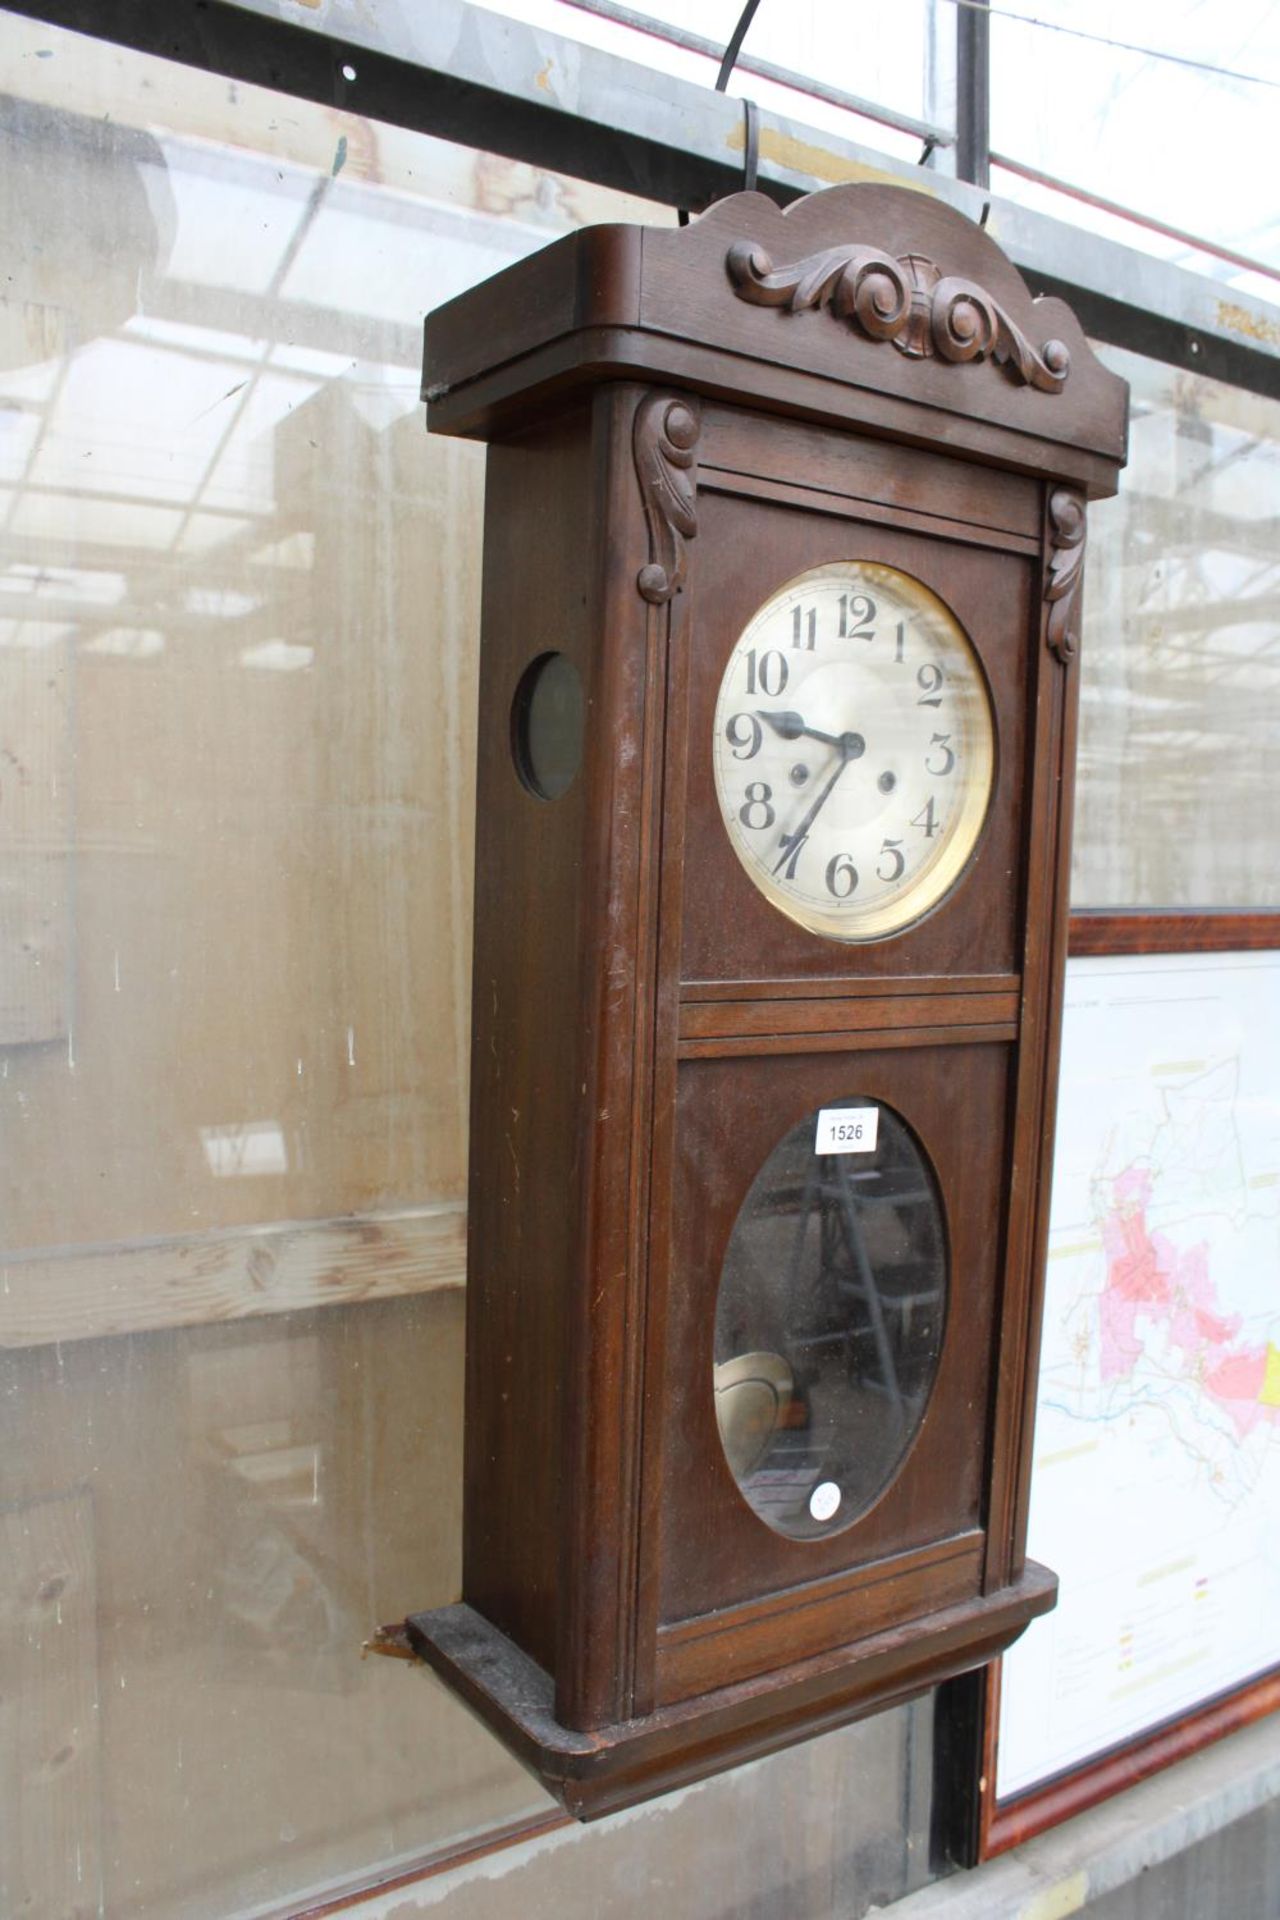 A VINTAGE OAK CASED CHIMING WALL CLOCK WITH WINDING KEY